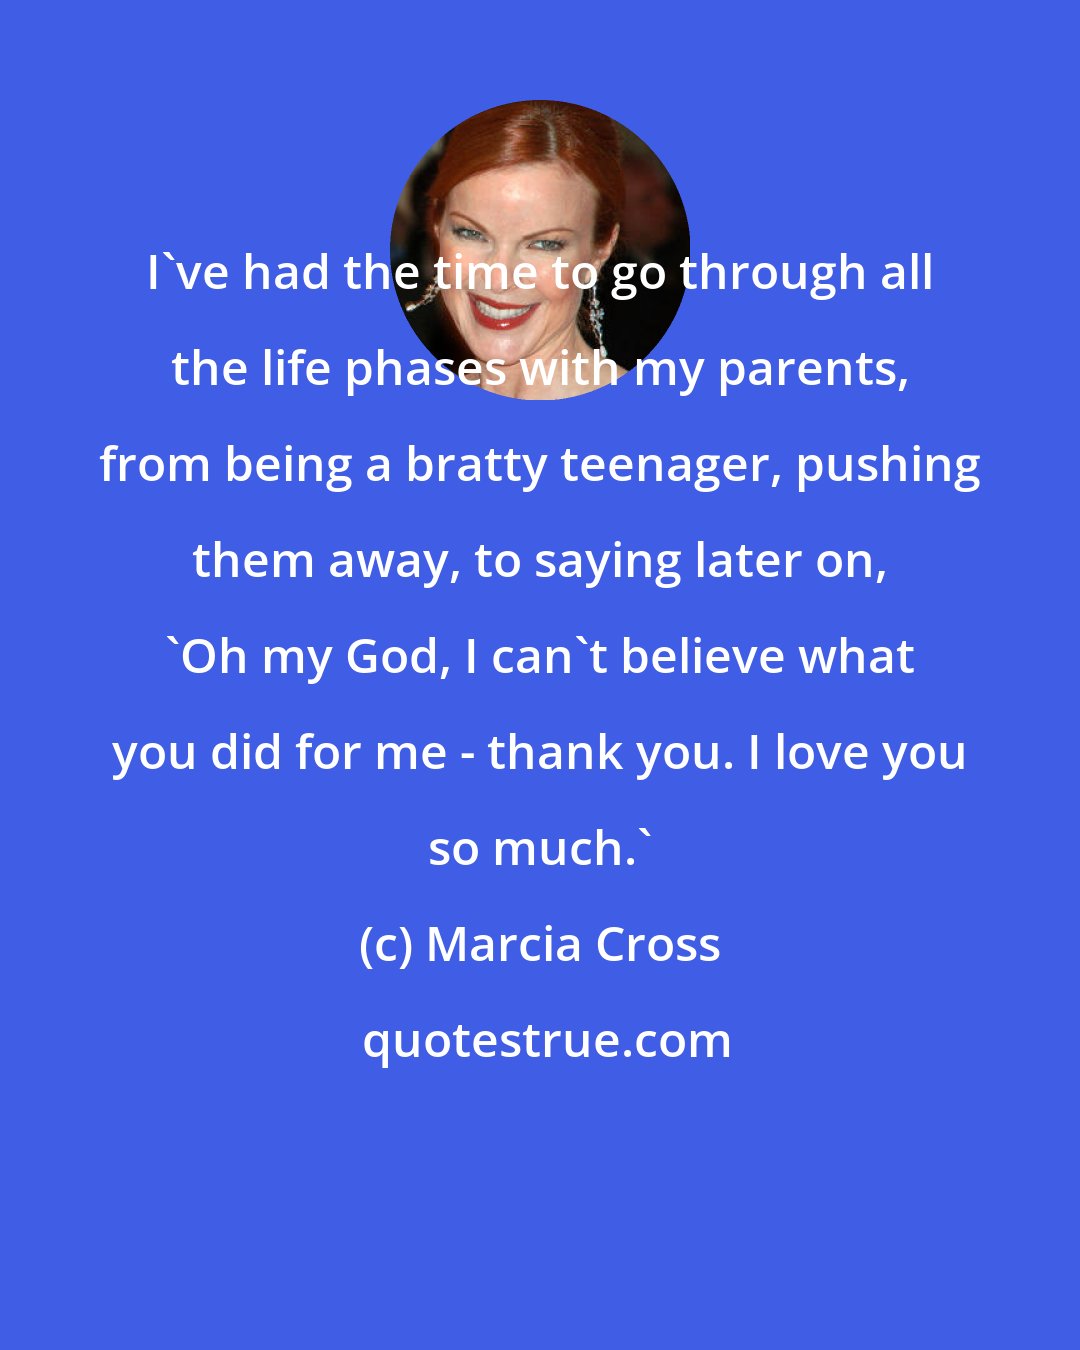 Marcia Cross: I've had the time to go through all the life phases with my parents, from being a bratty teenager, pushing them away, to saying later on, 'Oh my God, I can't believe what you did for me - thank you. I love you so much.'